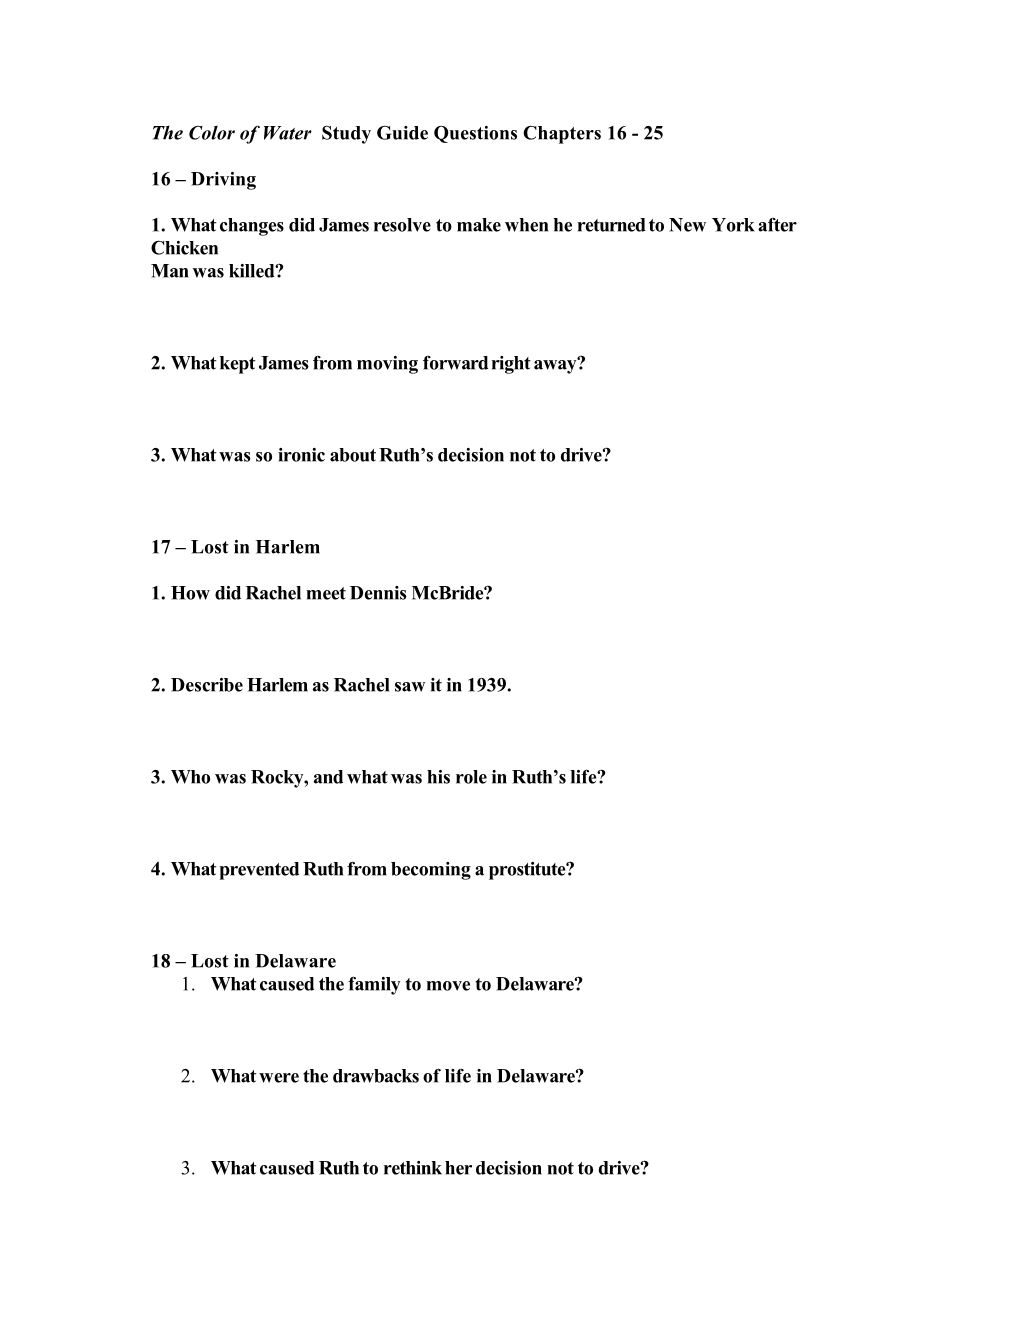 The Color of Water Study Guide Questions Chapters 16 - 25